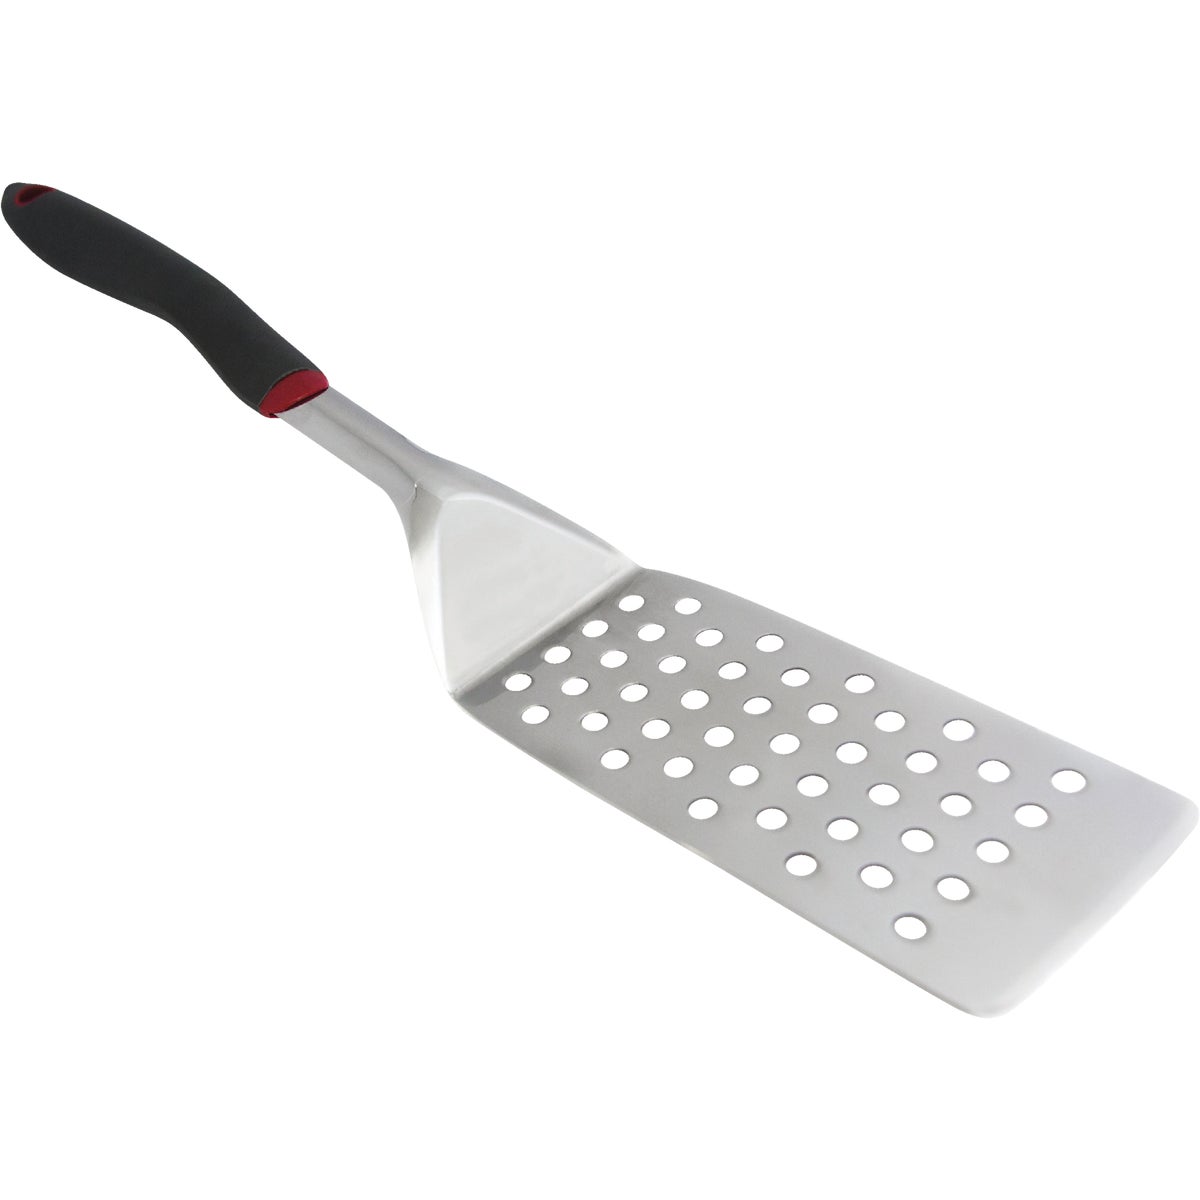 GrillPro 21 In. Stainless Steel Slotted Ergonomic Super Turner